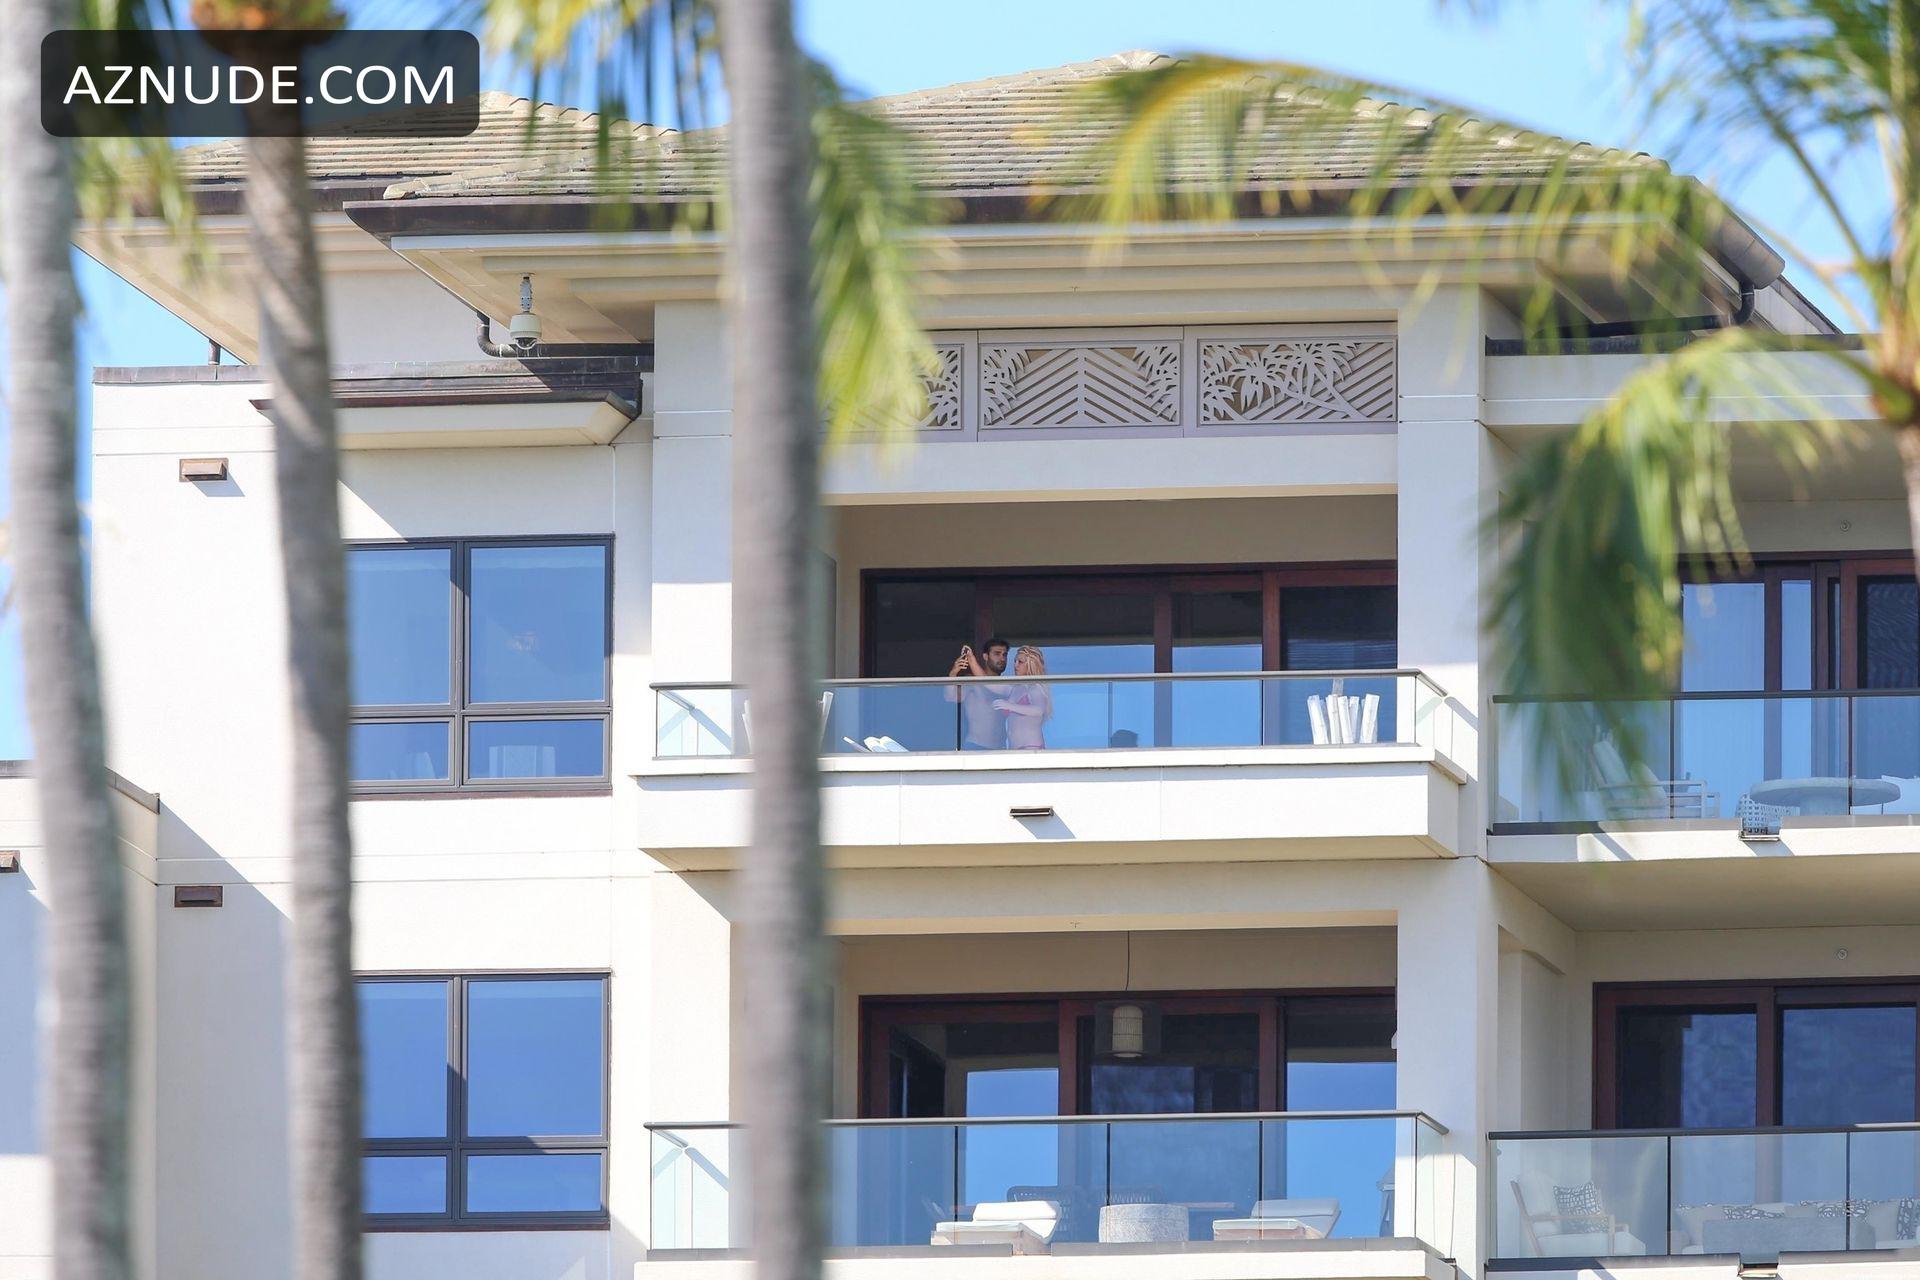 Britney Spears Sexy Snaps Pics On The Balcony While